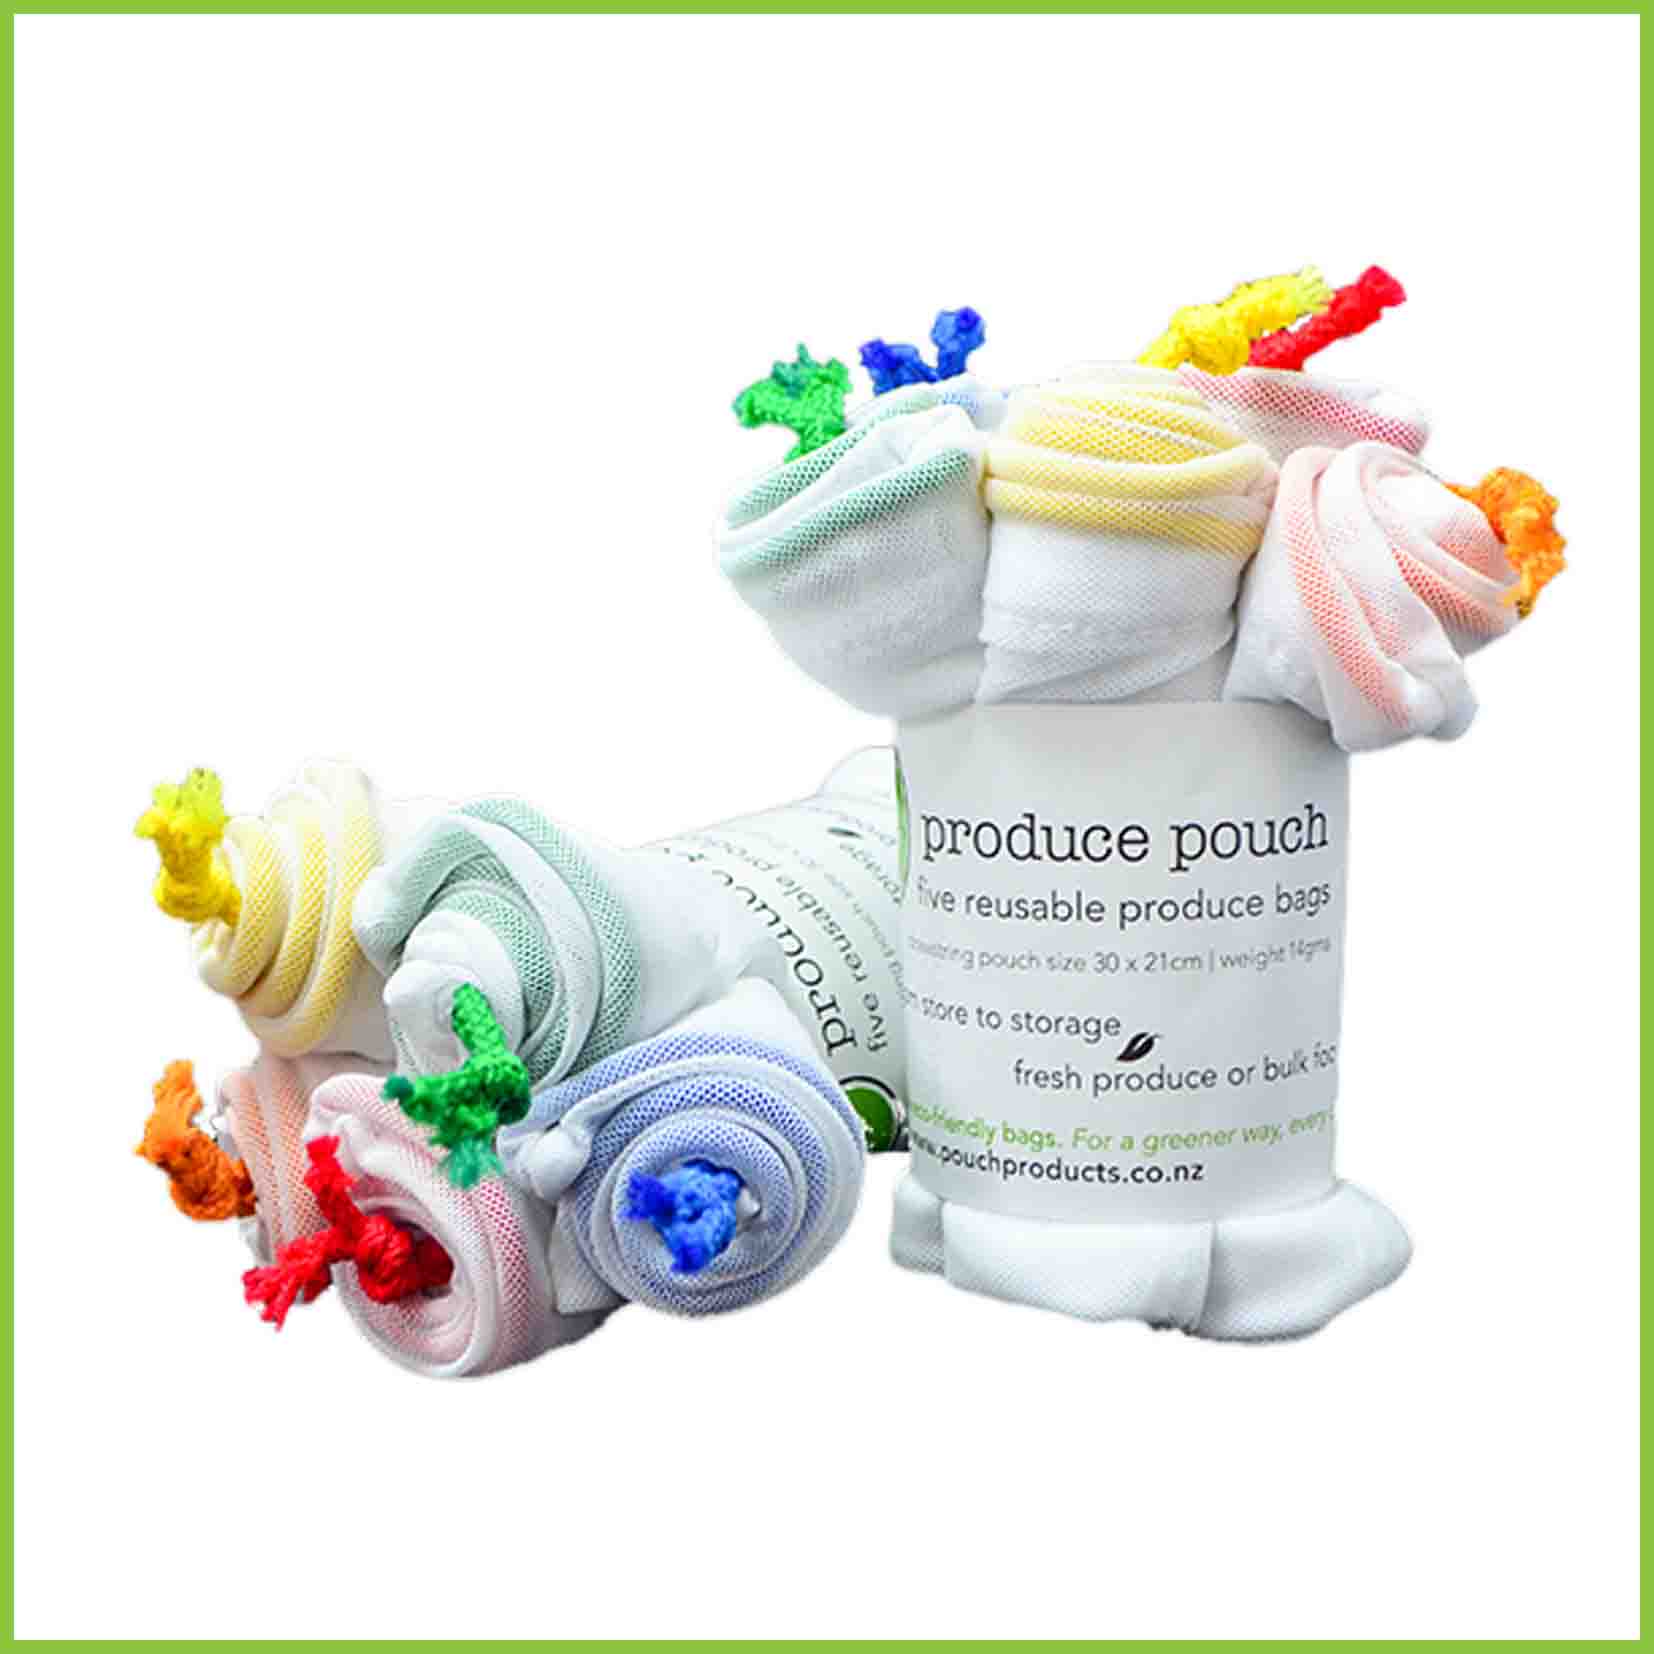 5 pack of produce pouches from Pouch Products.